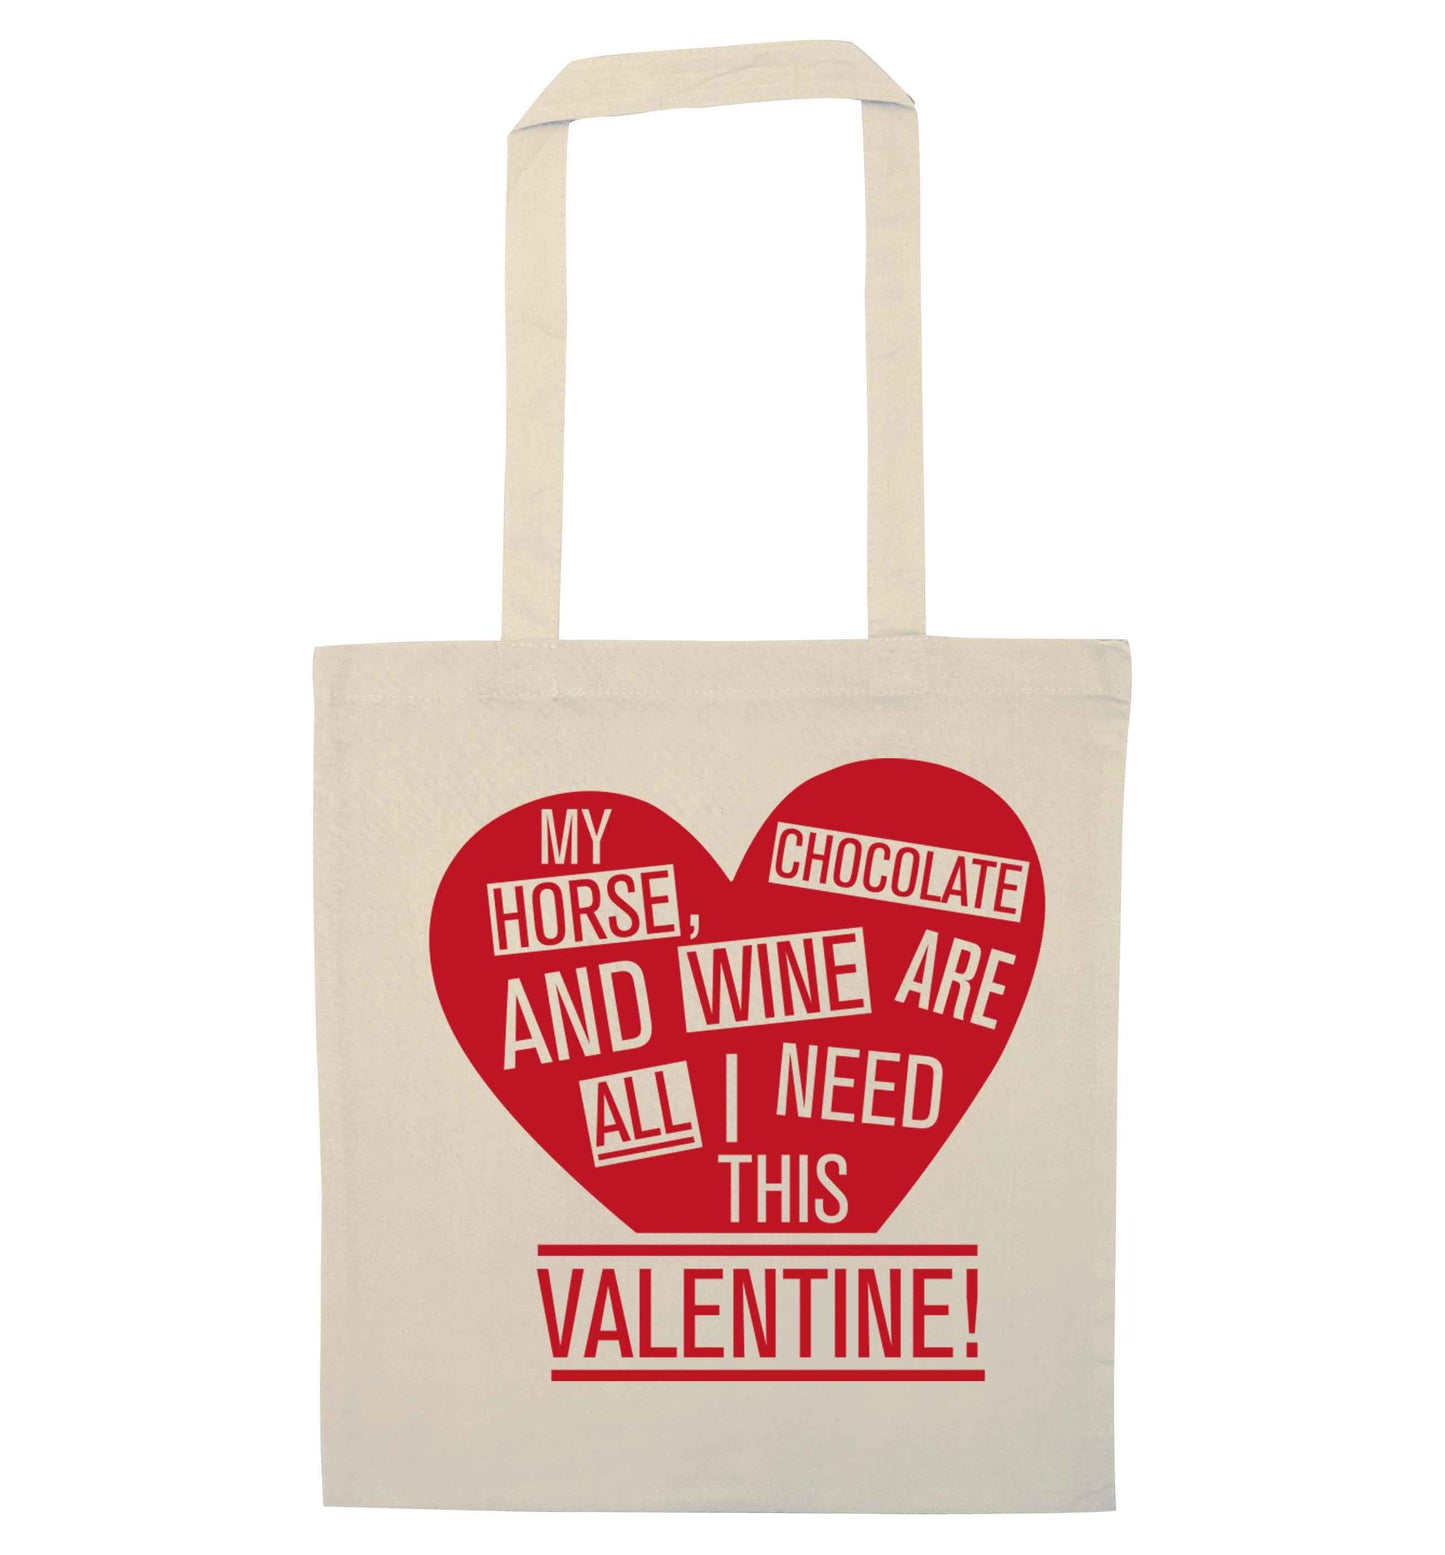 My horse chocolate and wine are all I need this valentine natural tote bag